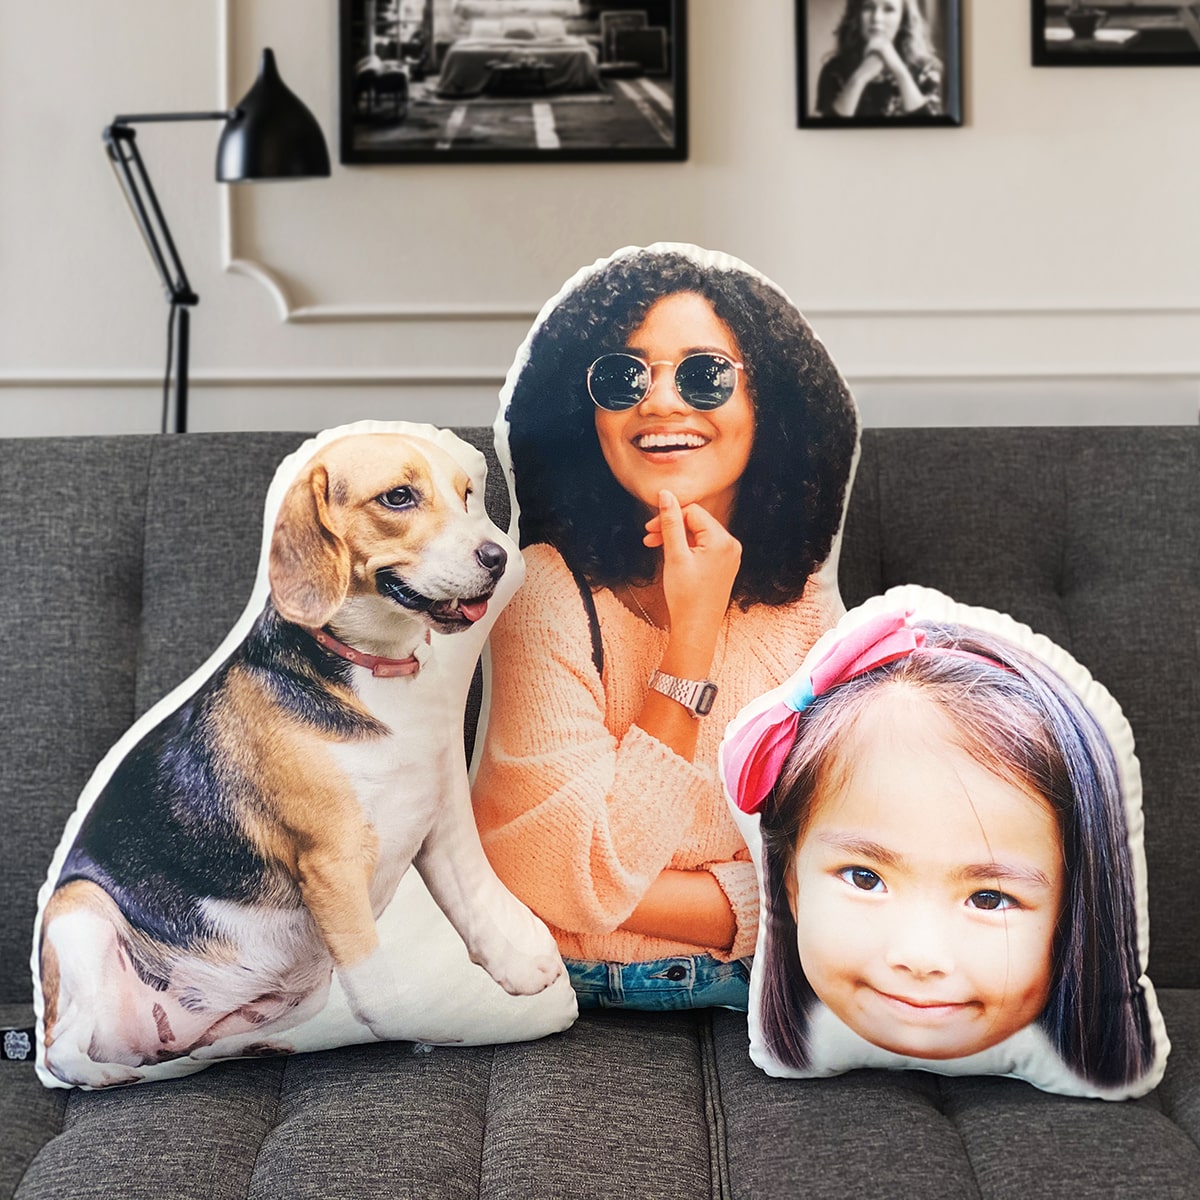 Turn Any Photo Into a Pillow, Personalized Pillows